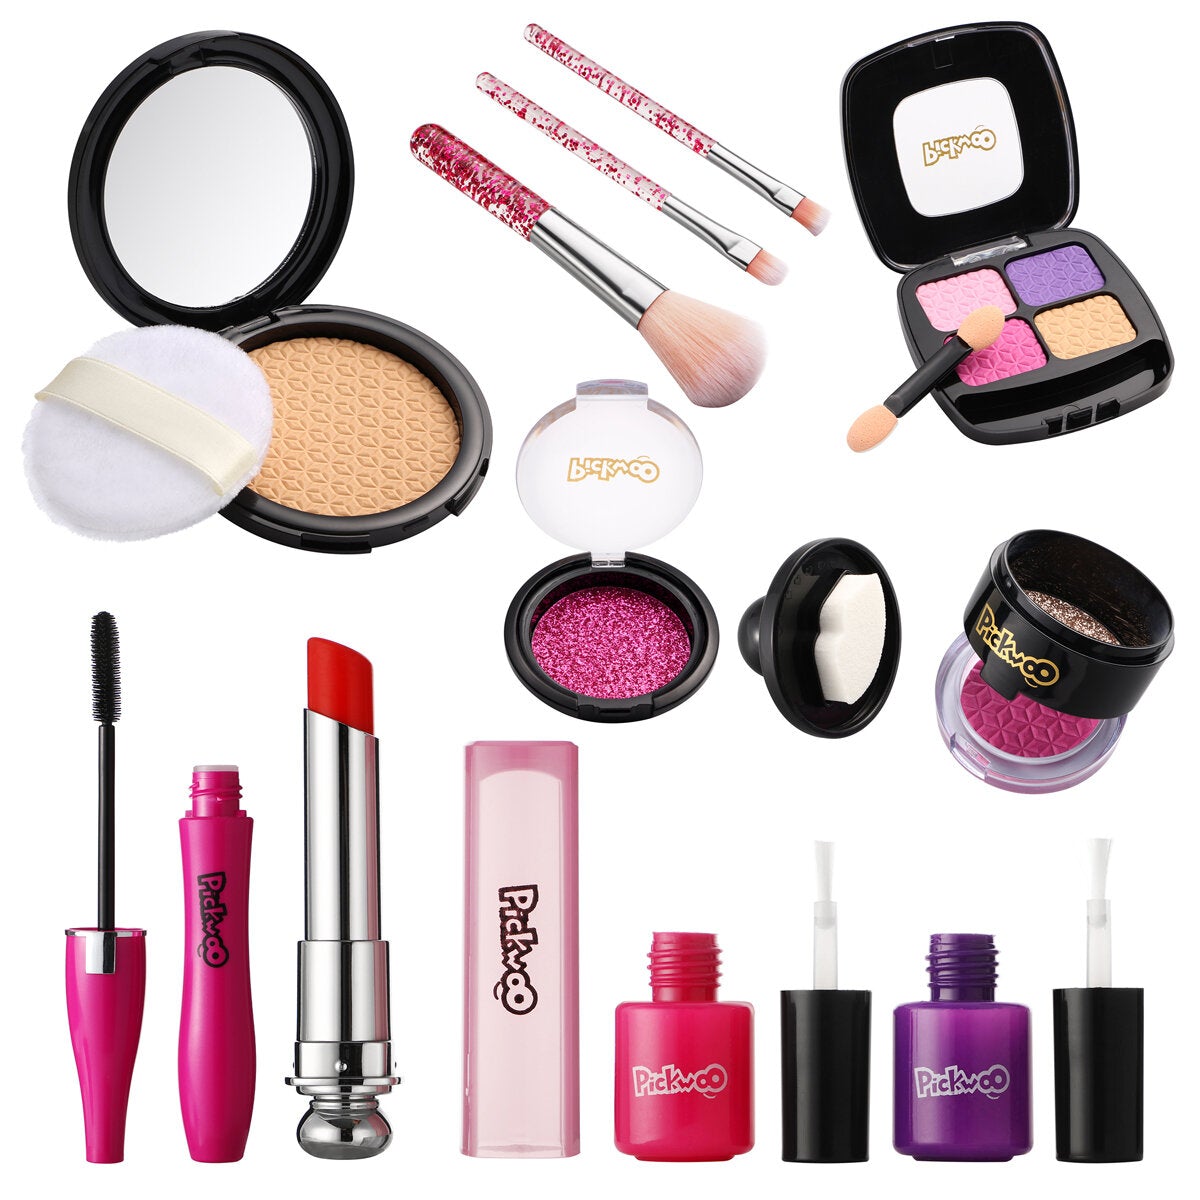 Simulation Pretend Play Makeup Set Fashion Beauty Toy for Kids Girls Gift